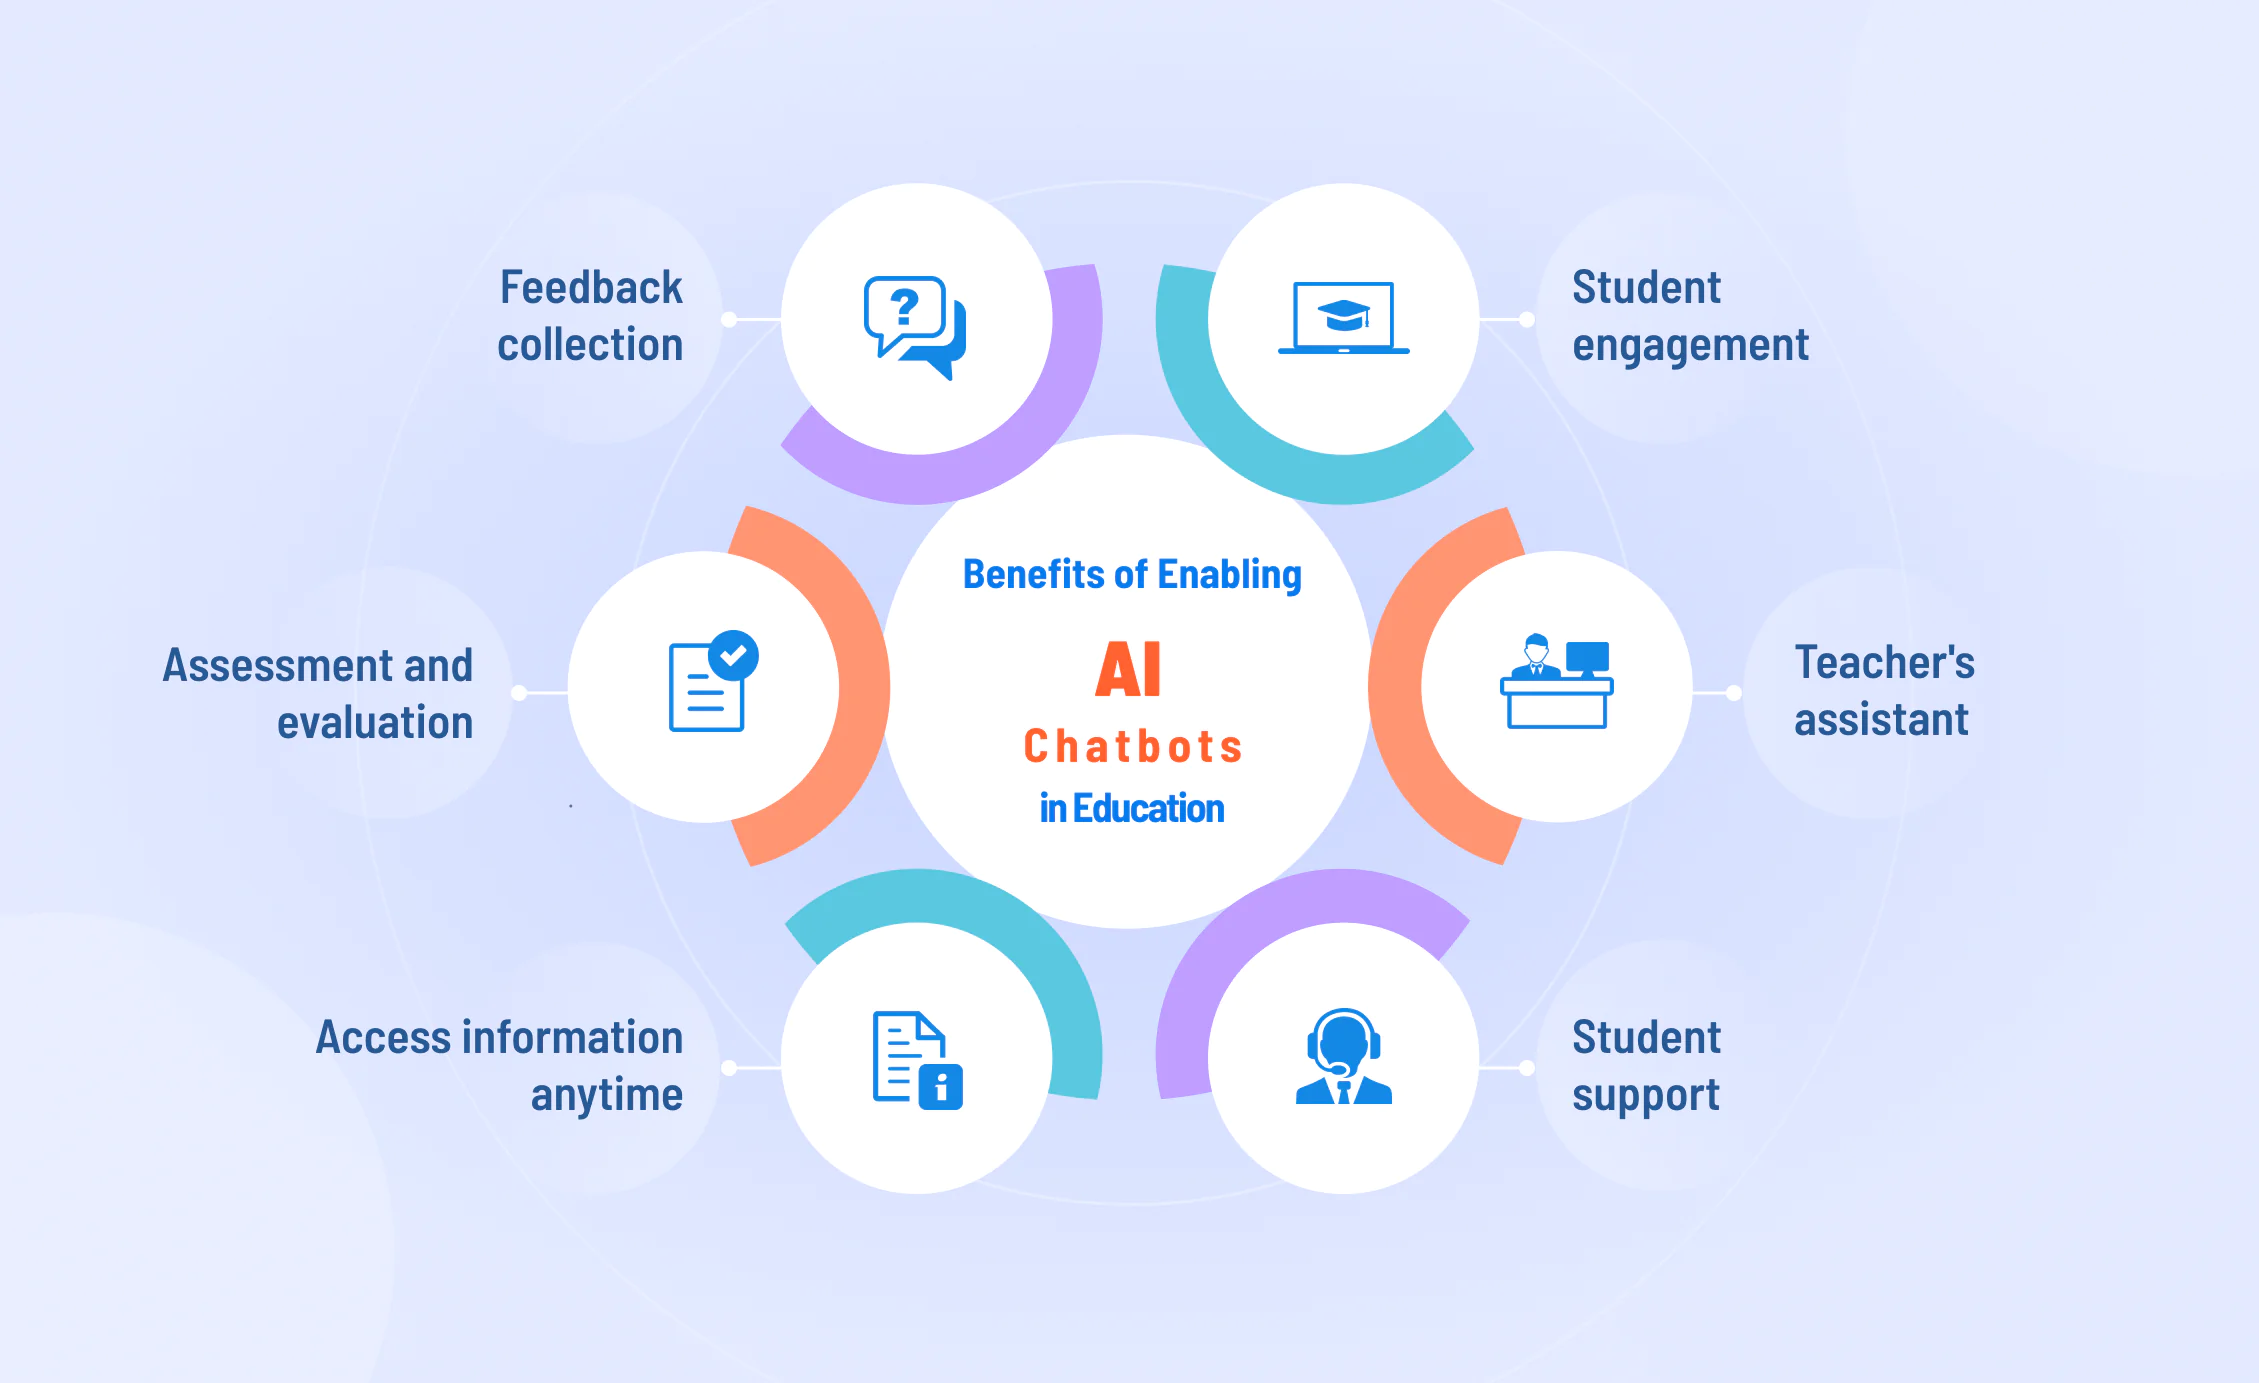 Some Benefits of Enabling AI Chatbots in Education